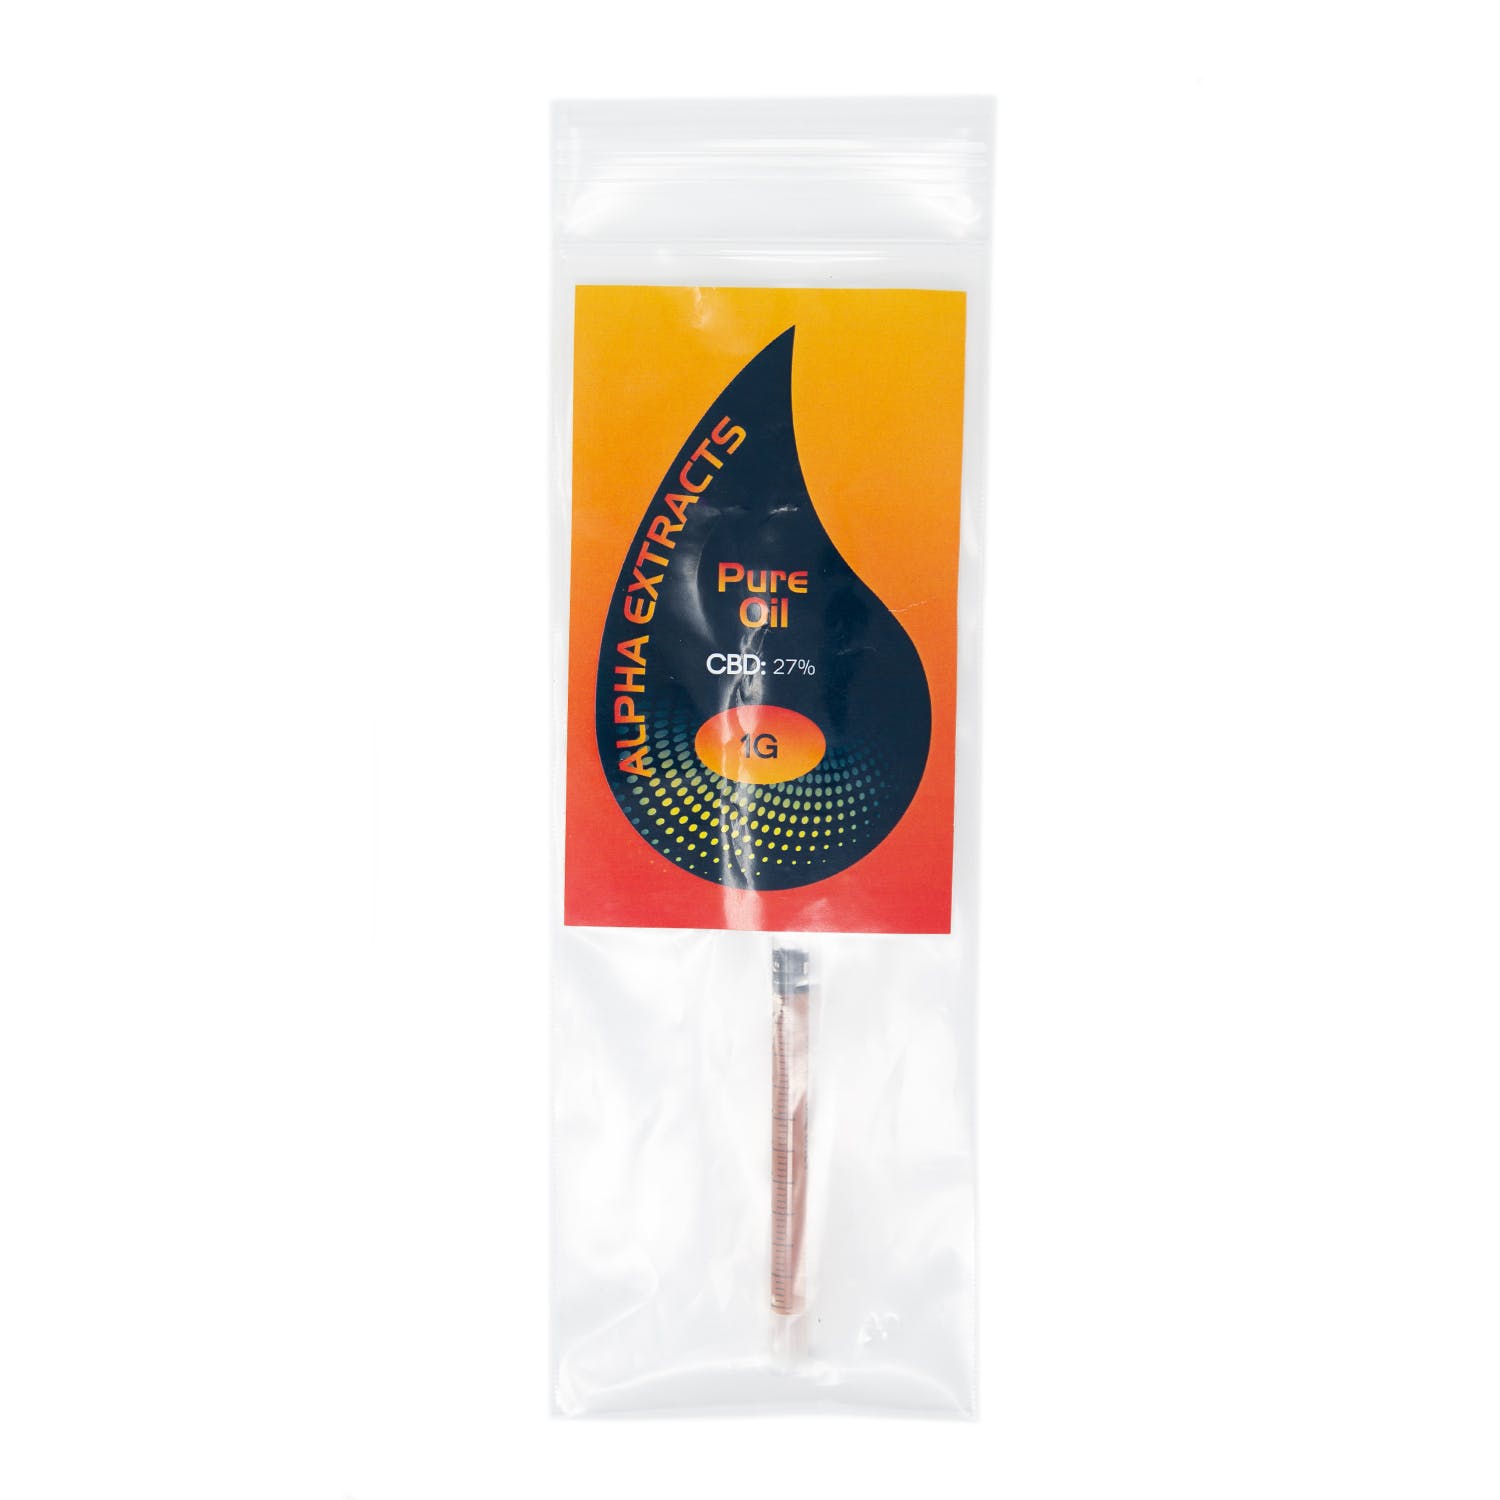 edible-alpha-extracts-pure-oil-syringe-1g-27-25-cbd